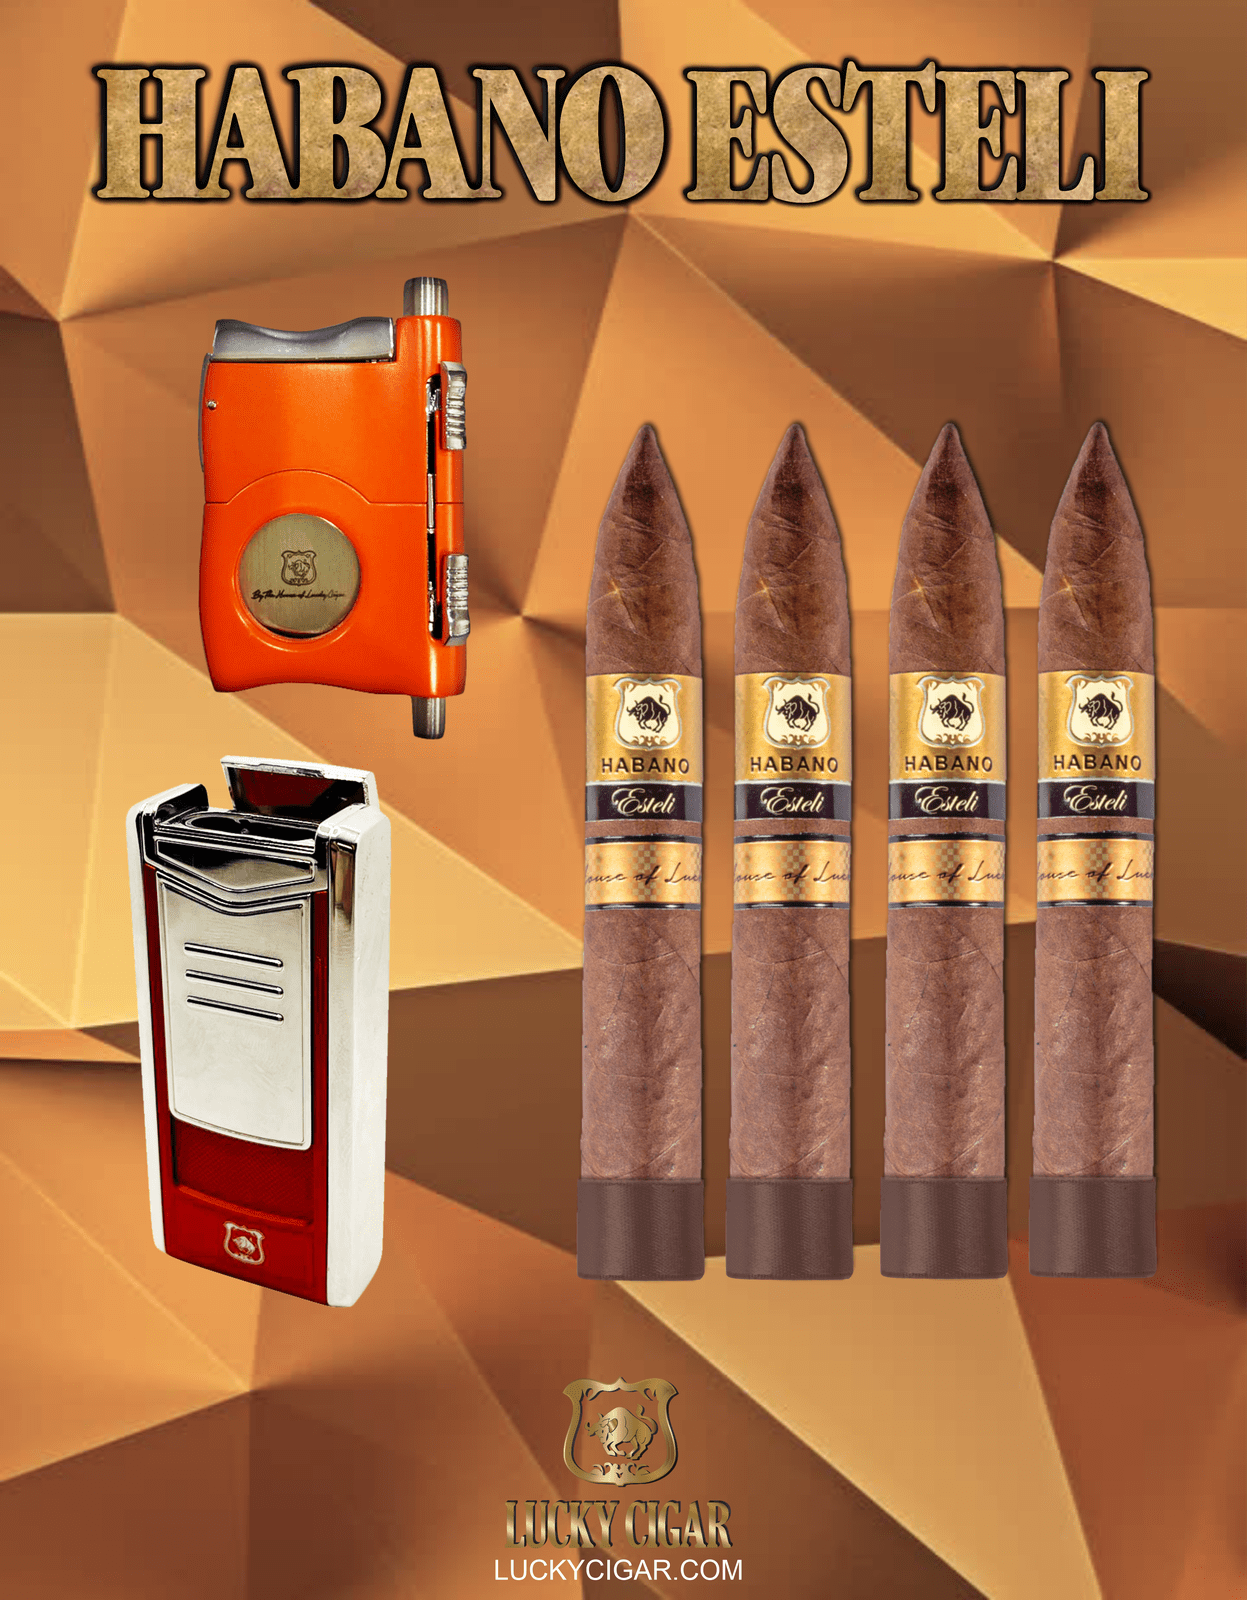 Habano Cigars: Habano Esteli by Lucky Cigar: Set of 4 Cigars, 4 Torpedo with Cutter, Lighter